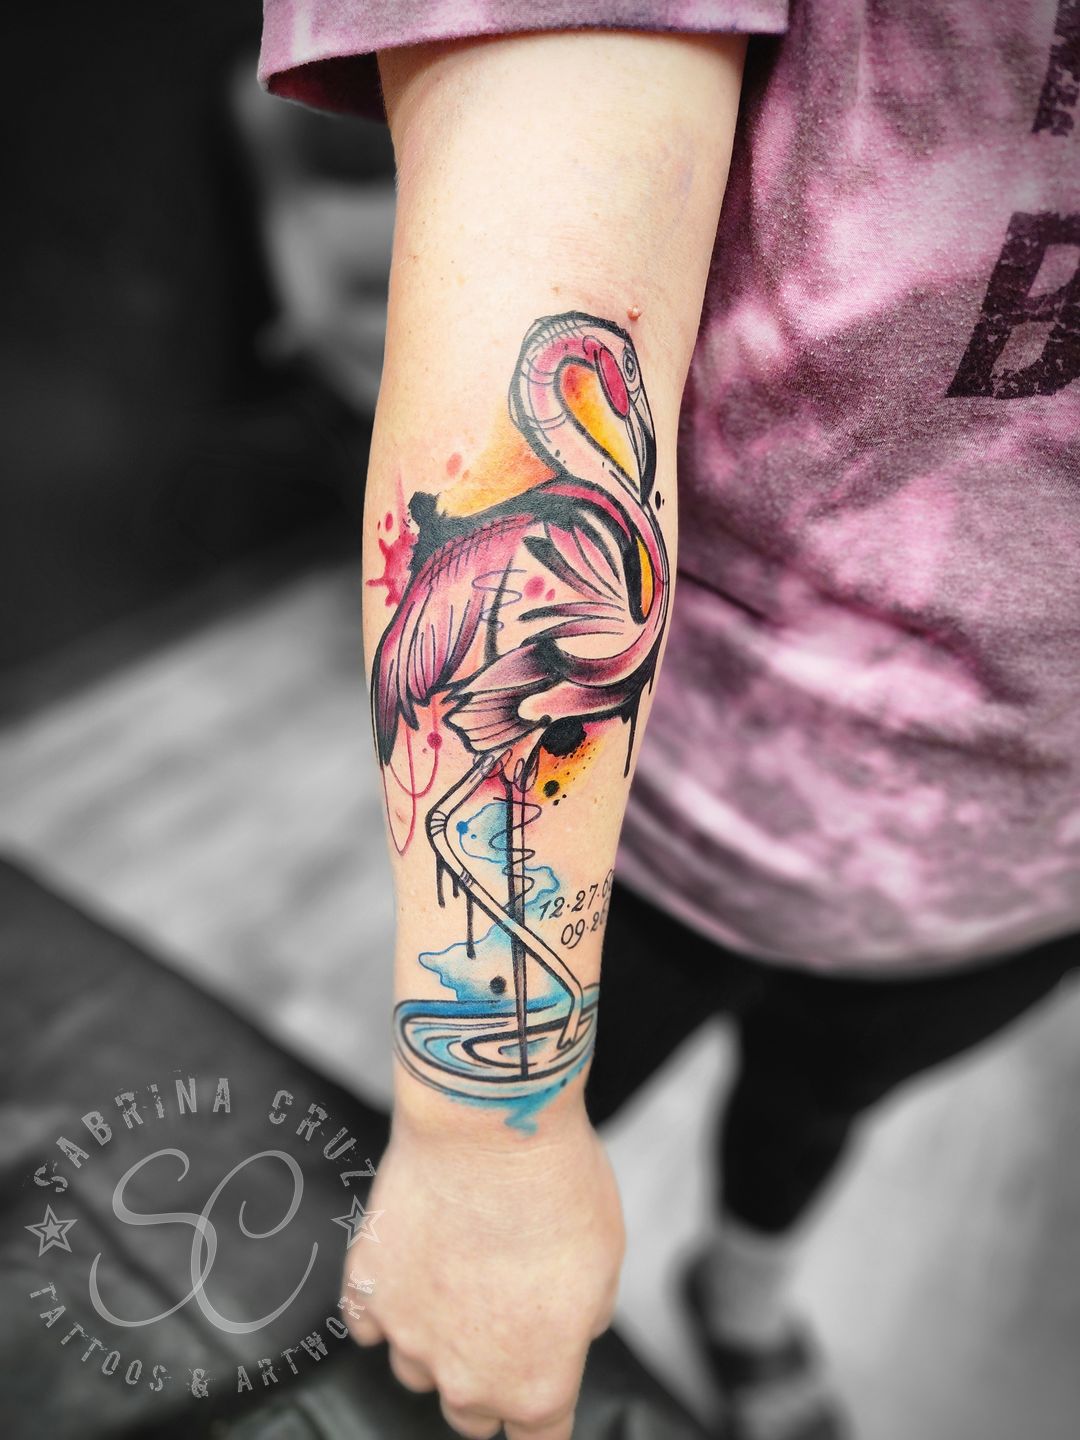 What You Need To Know Before You Get A Watercolor Tattoo